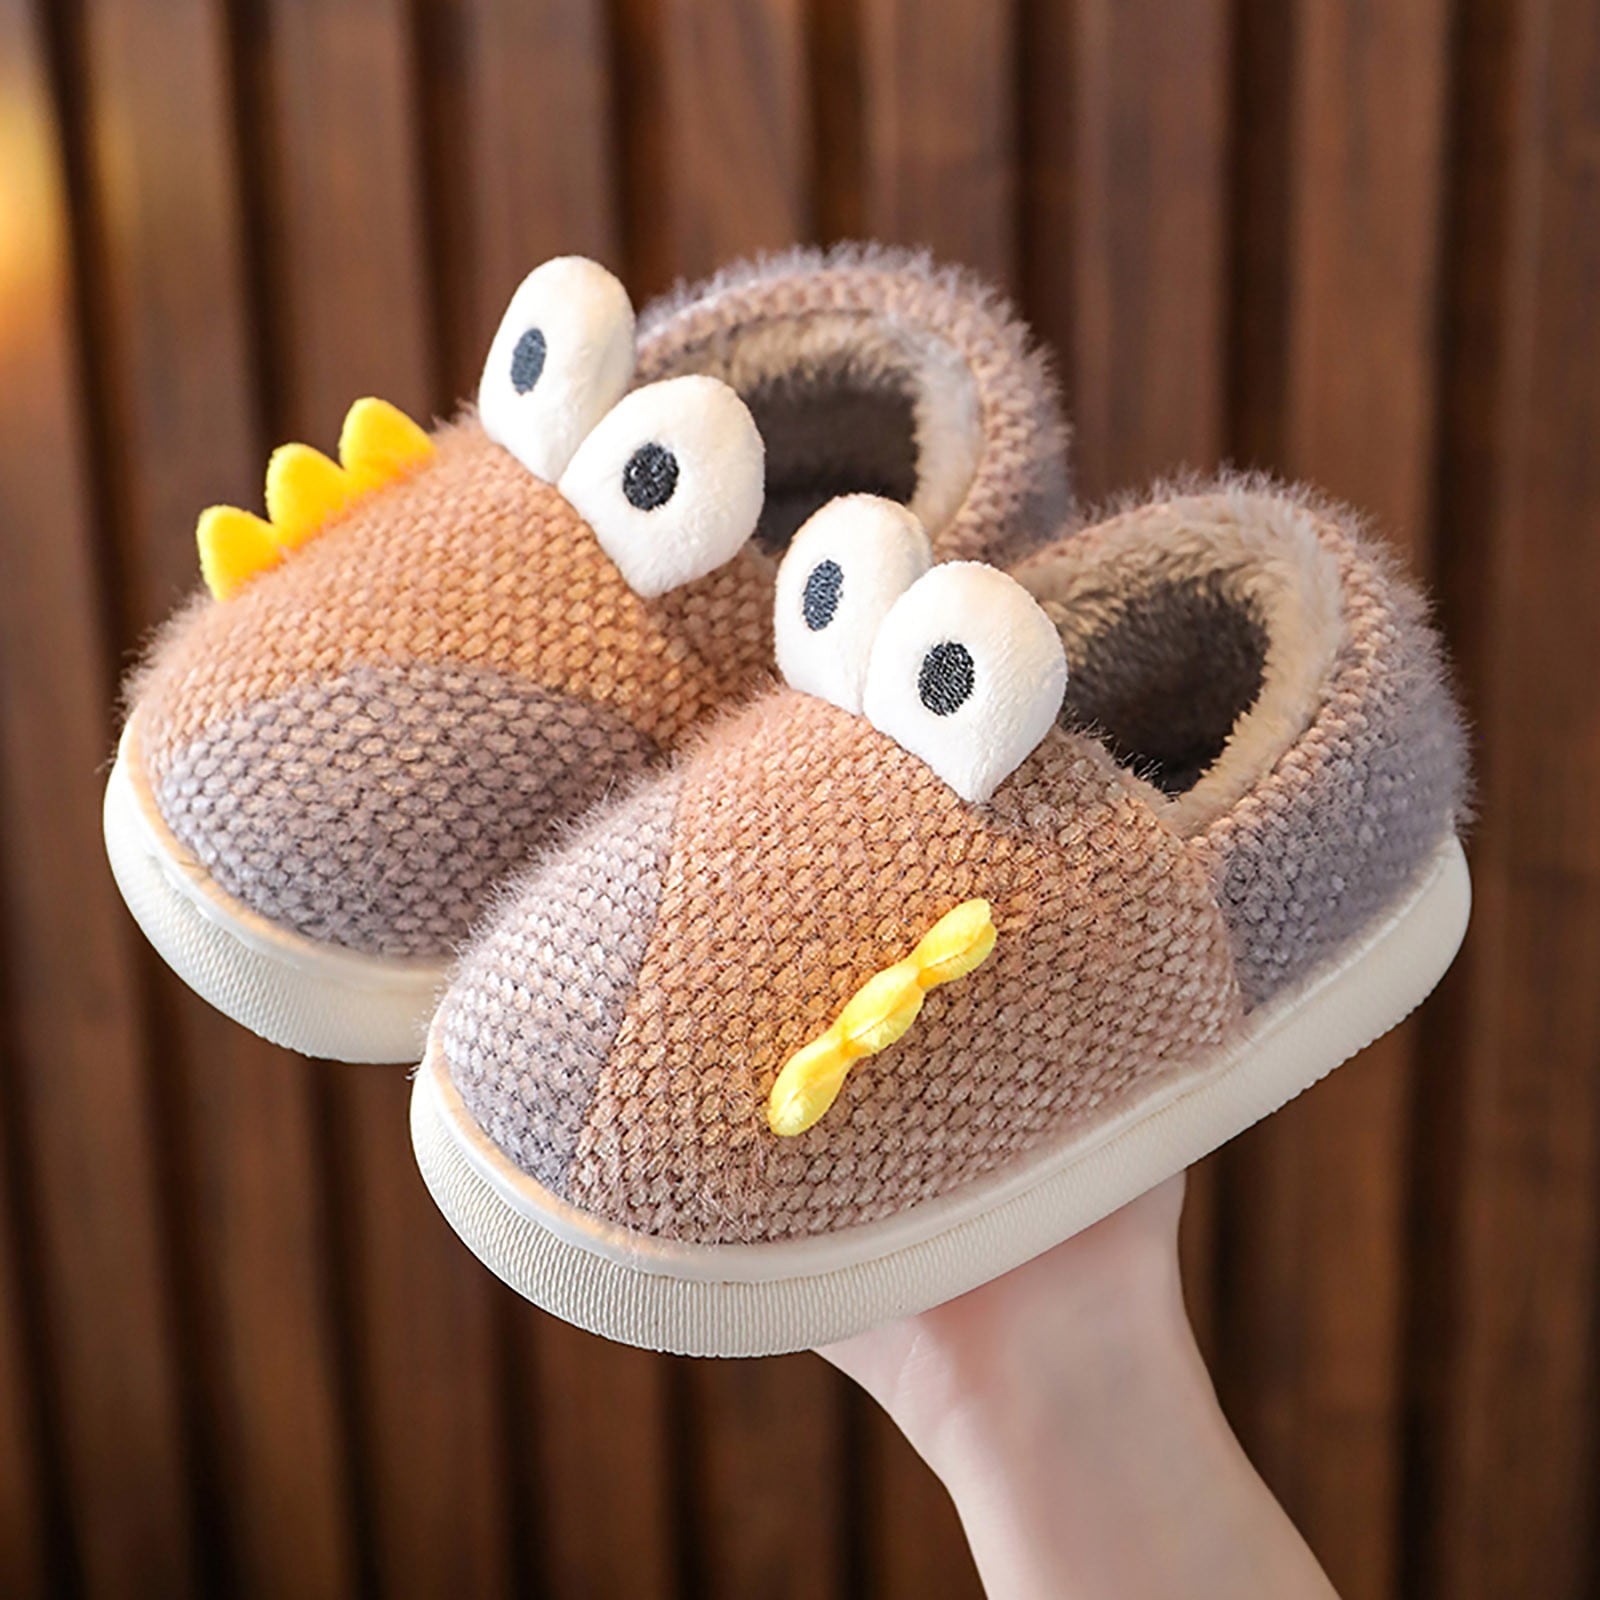 Slipper Childrens Cork Cotton Shoes Boys Plush Sandals Girls Babies Indoor  Outdoor Home Slippers Toddler From Huoyineji, $22.67 | DHgate.Com